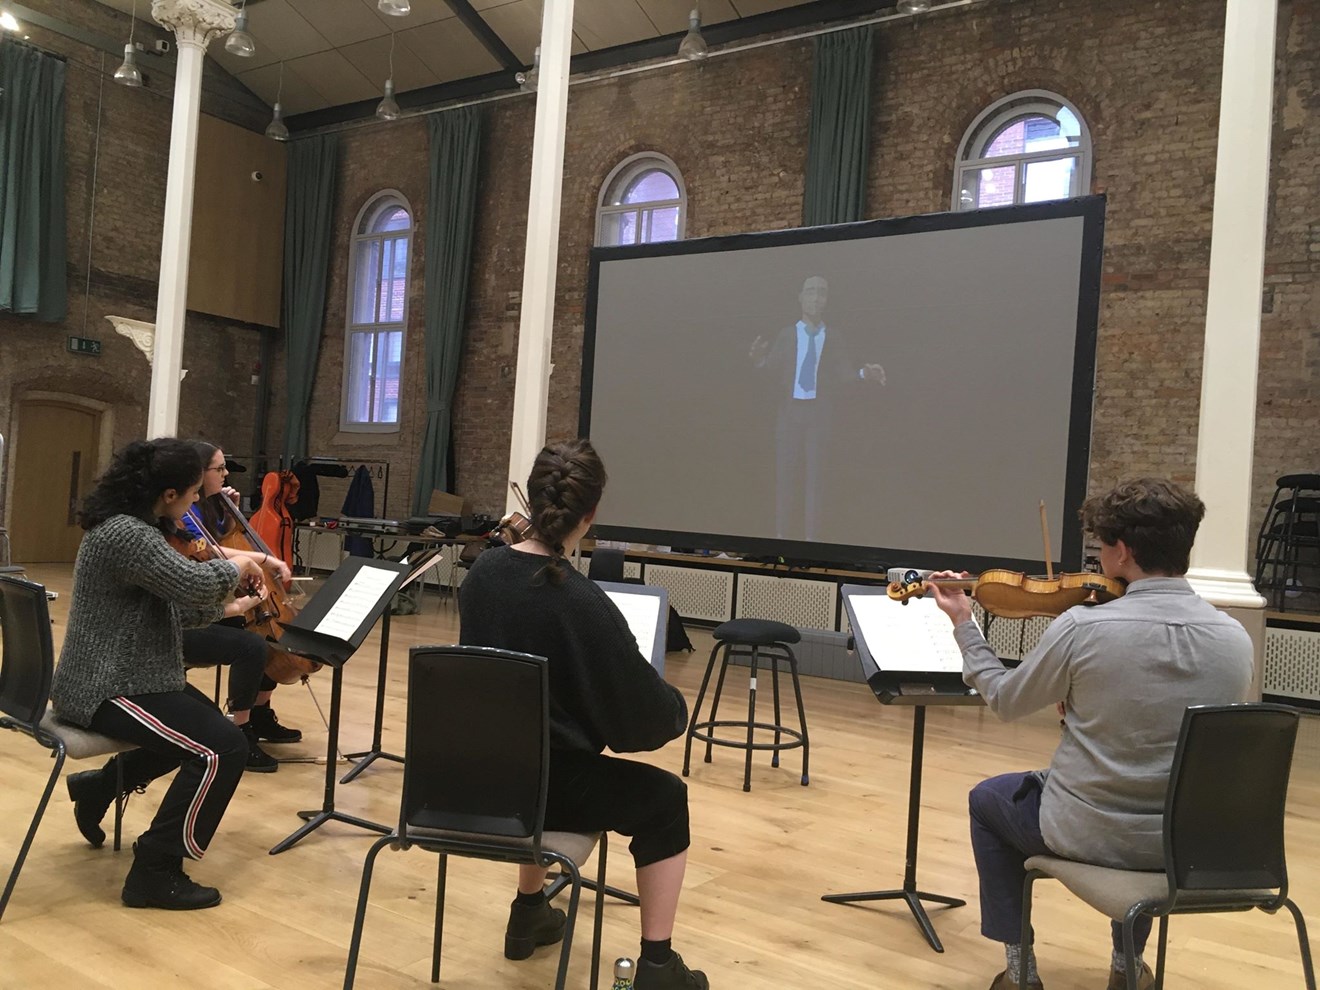 Siemens and the Hallé orchestra develop virtual conductor: Halle orchestra trialling the Siemens avatar (002)